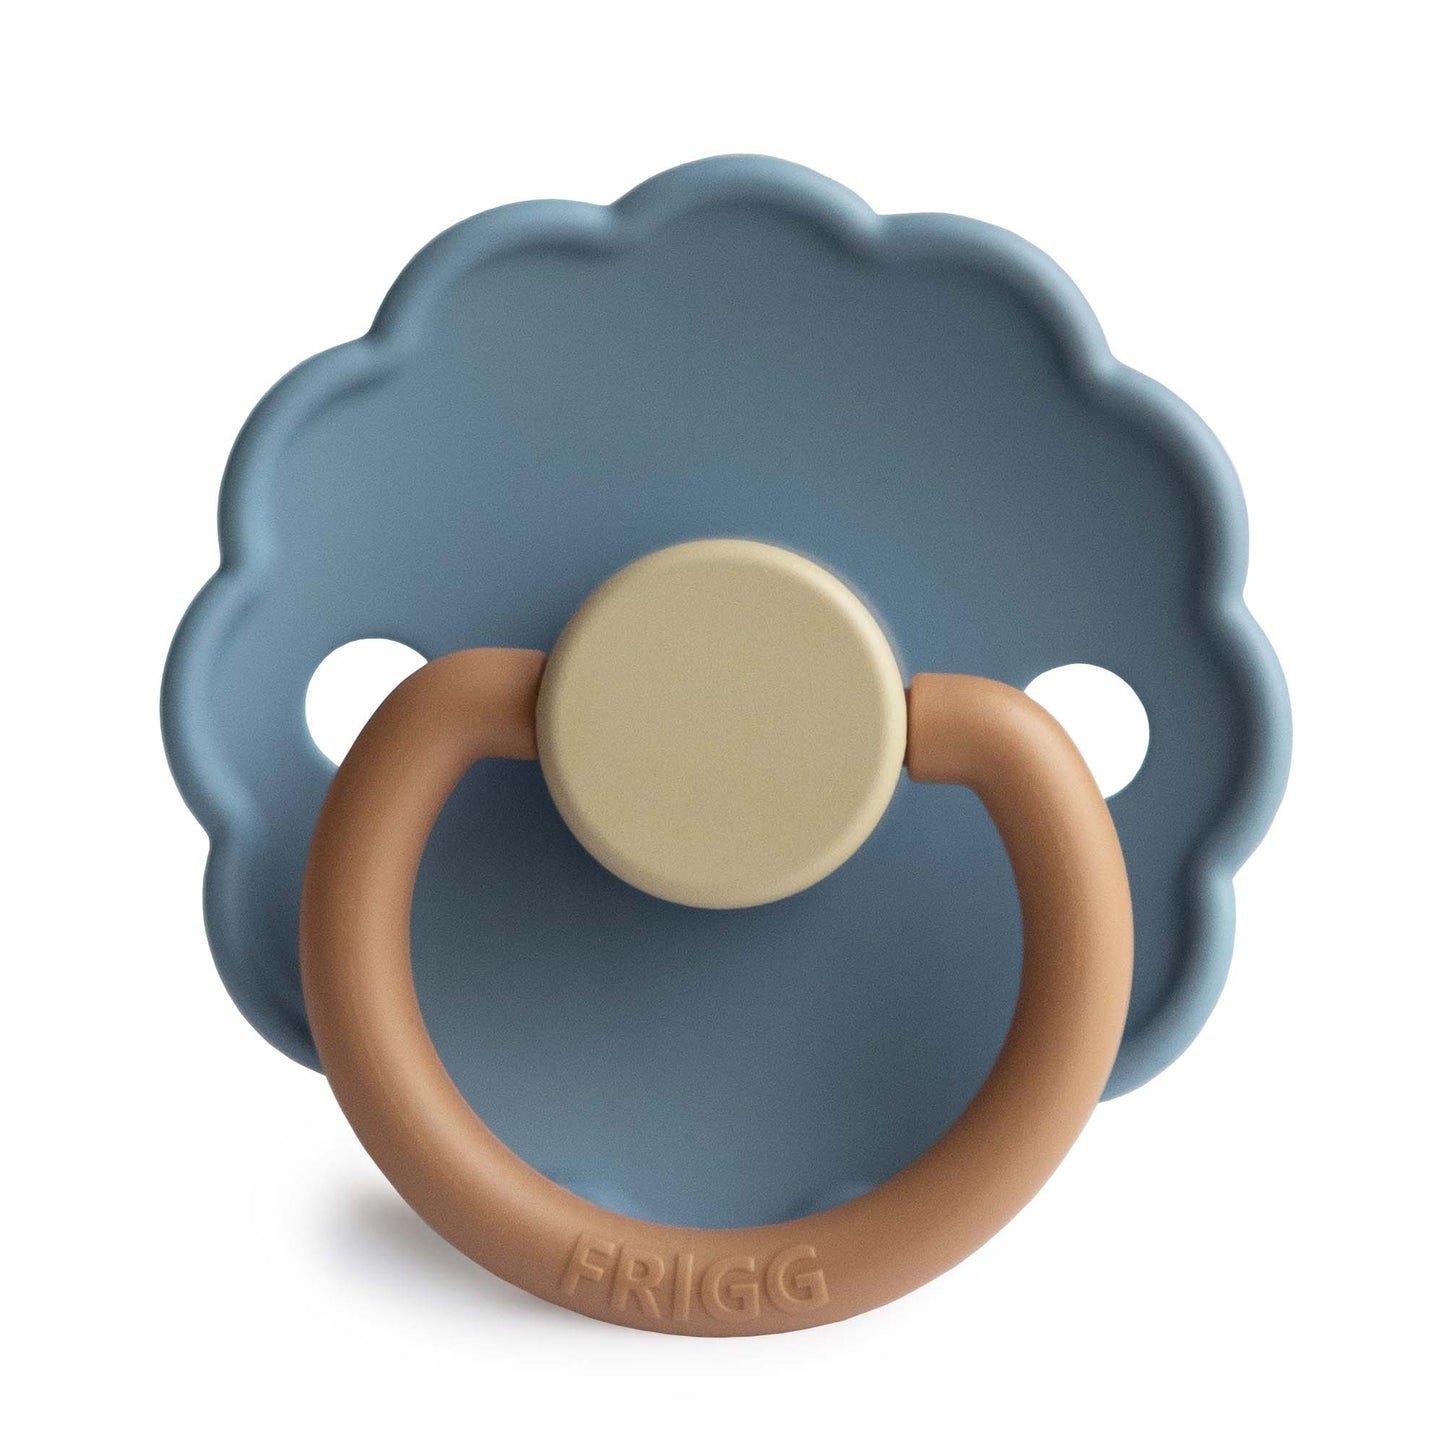 FRIGG Daisy Silicone Baby Pacifier 1-Pack Breeze 6-18 months